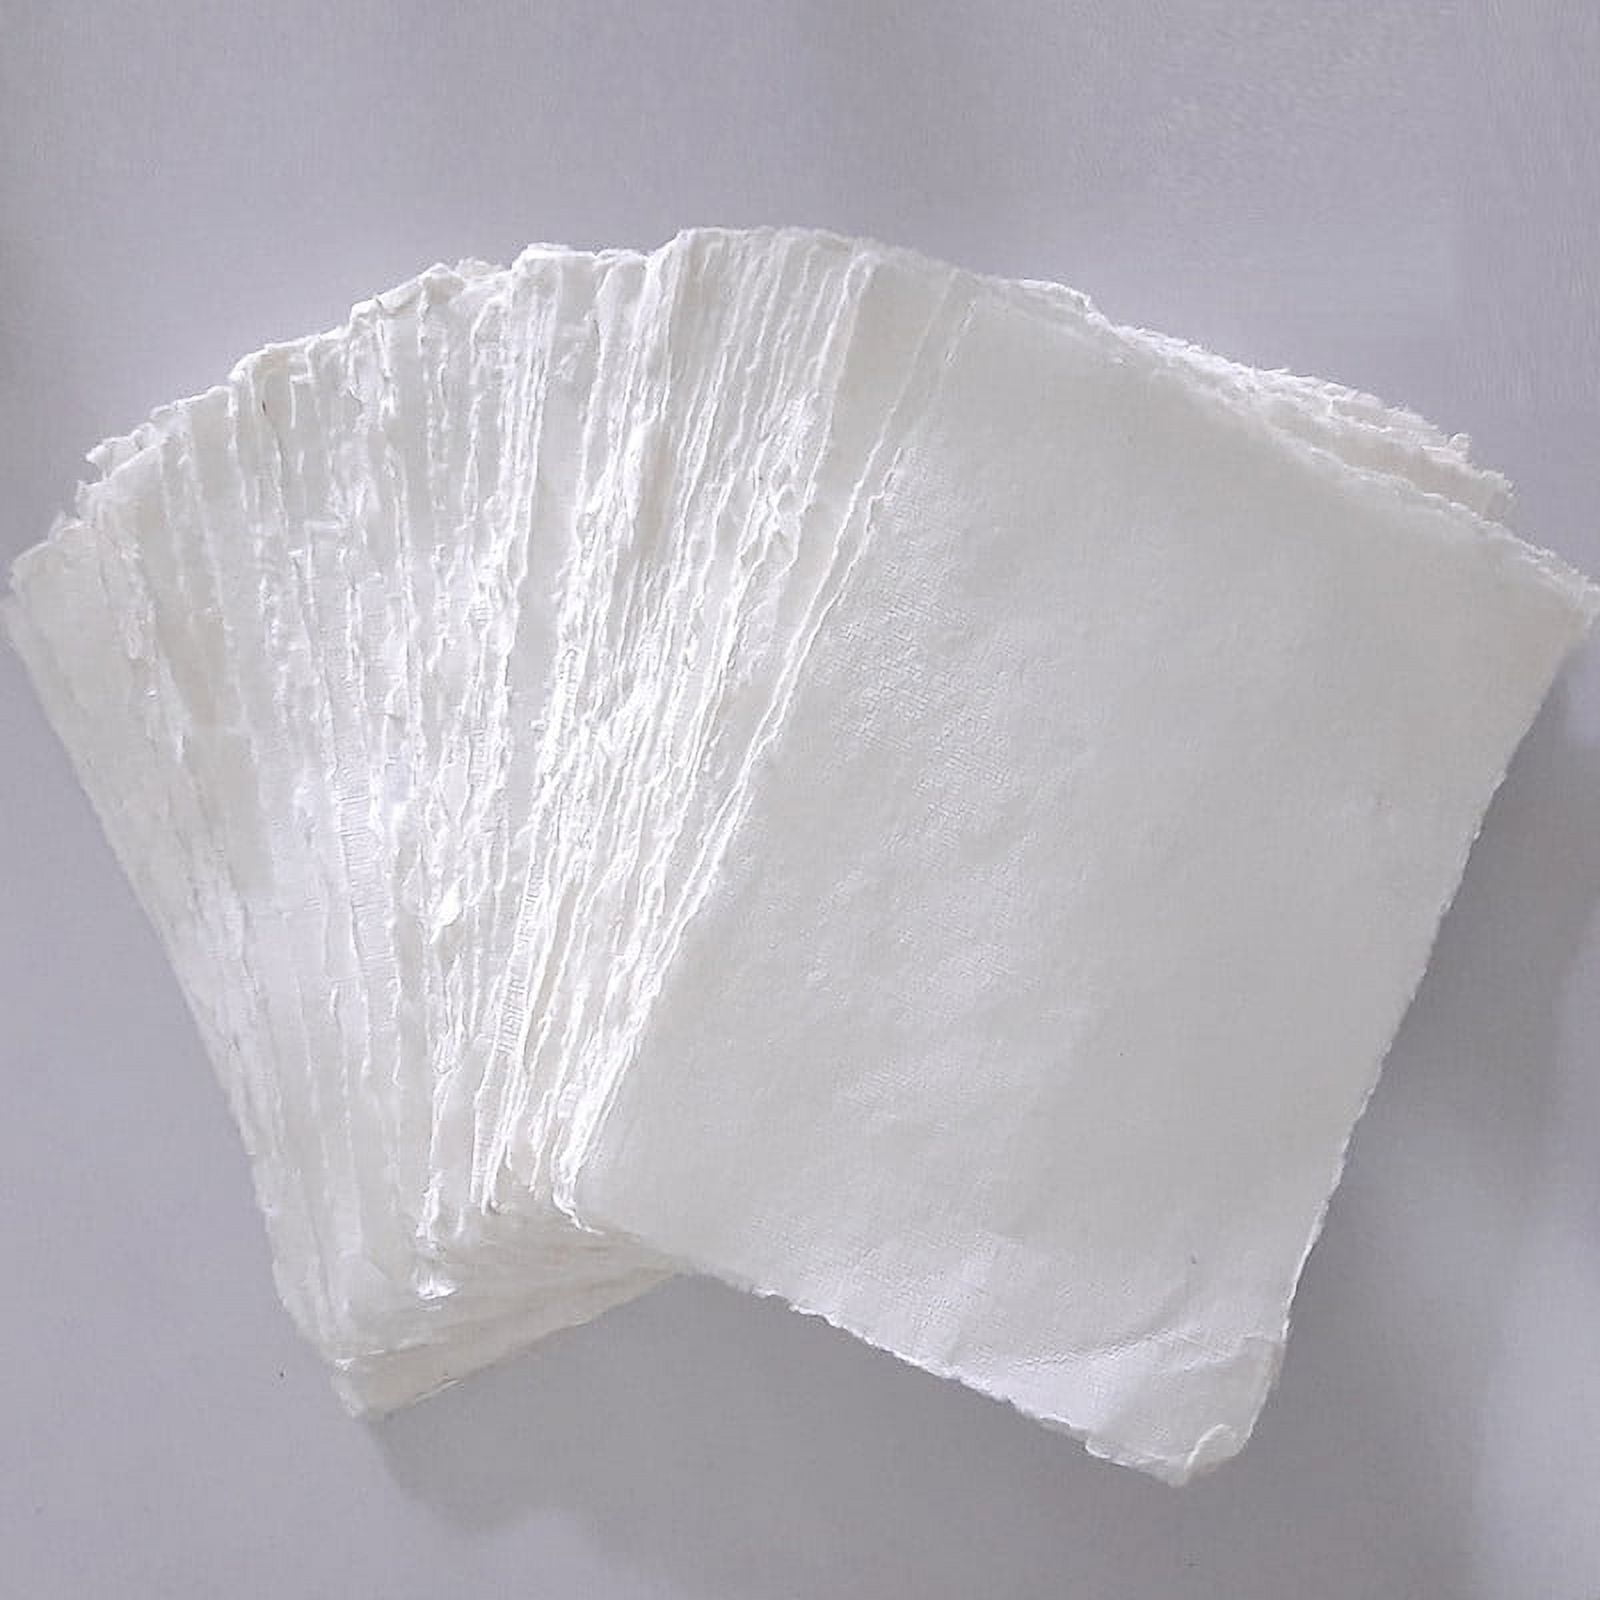 White Deckle-edge Cotton Rag Paper, Sizes Available: 5x7, 4x6, A5, A4, A3  Wedding Invites, Stationery Paper, Handmade Paper 